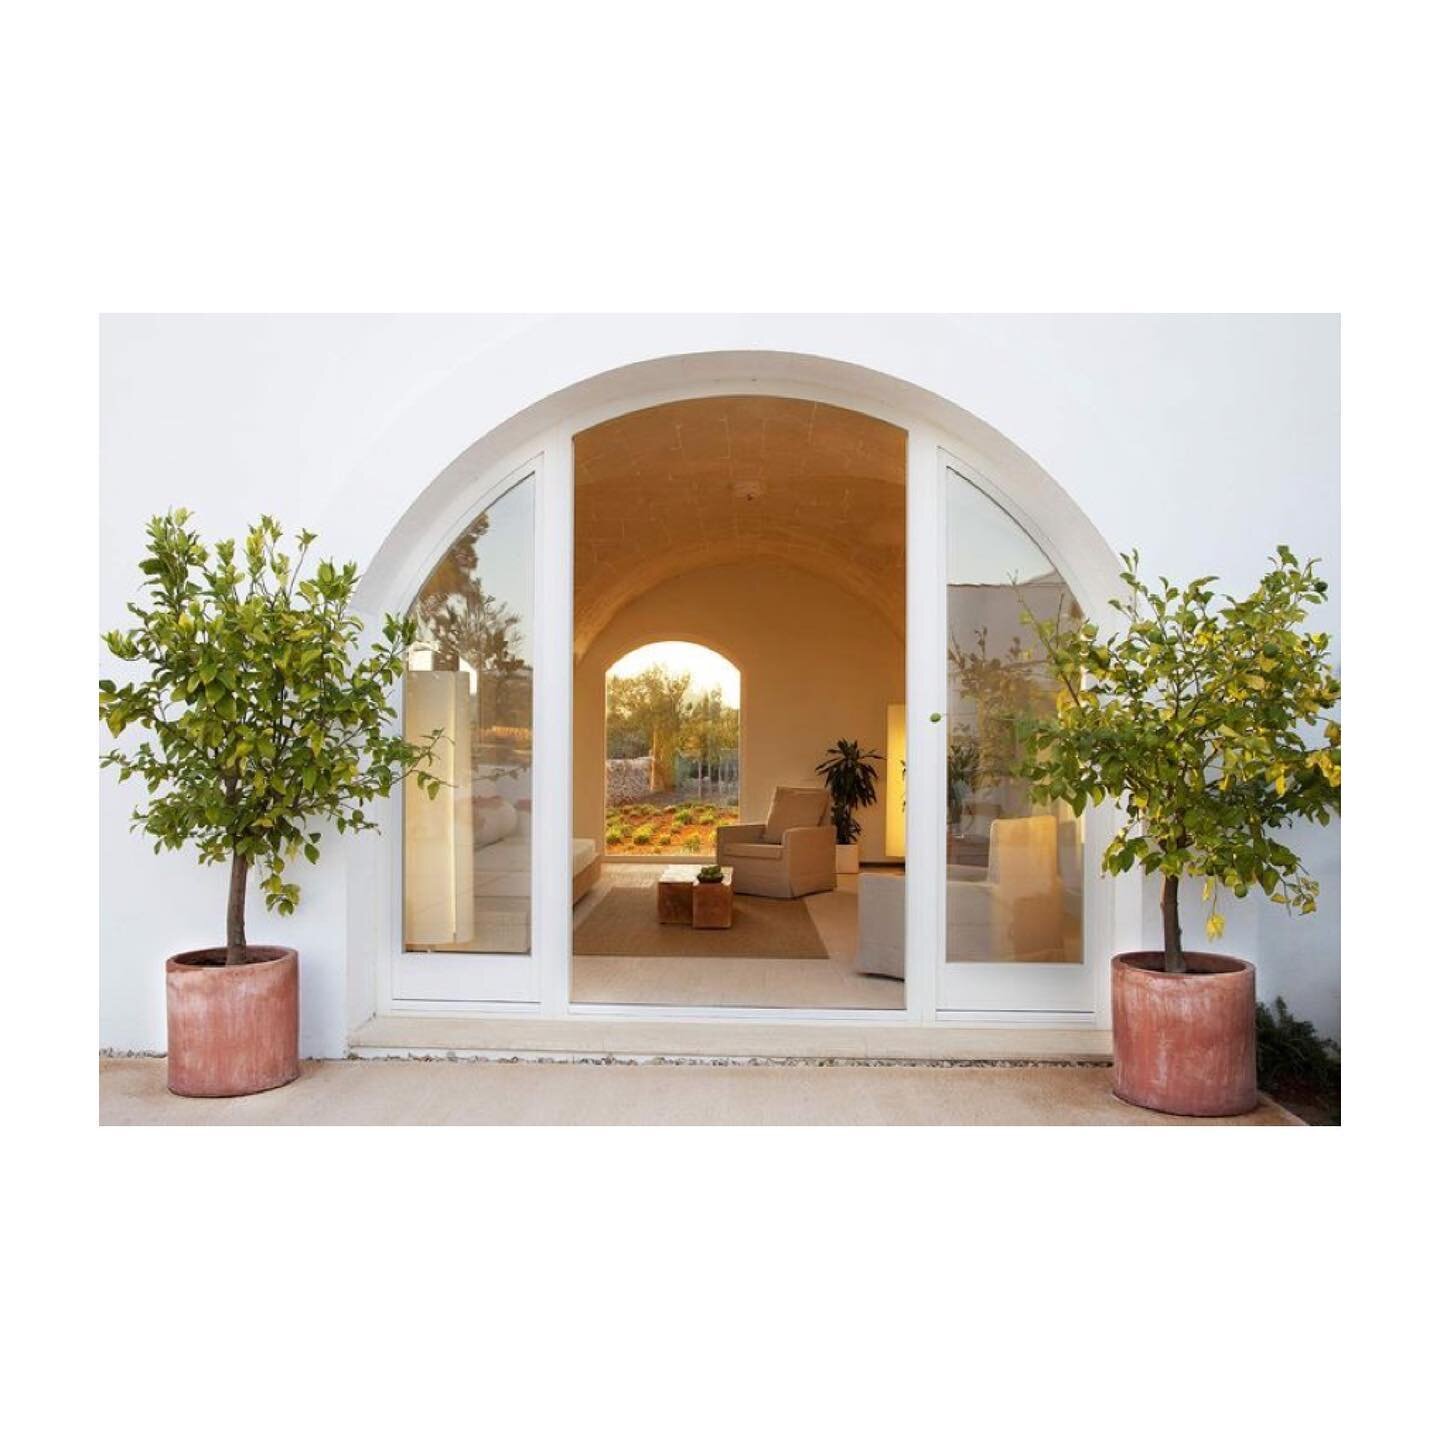 Time to plan a trip after seeing the entry to the @torralbenc hotel - a 19th country house in Menorcan that was restored. 

#vacation #readyforavacation #realestatecollective #larealestate #designmatters #designinspiration #designaddict #designelemen